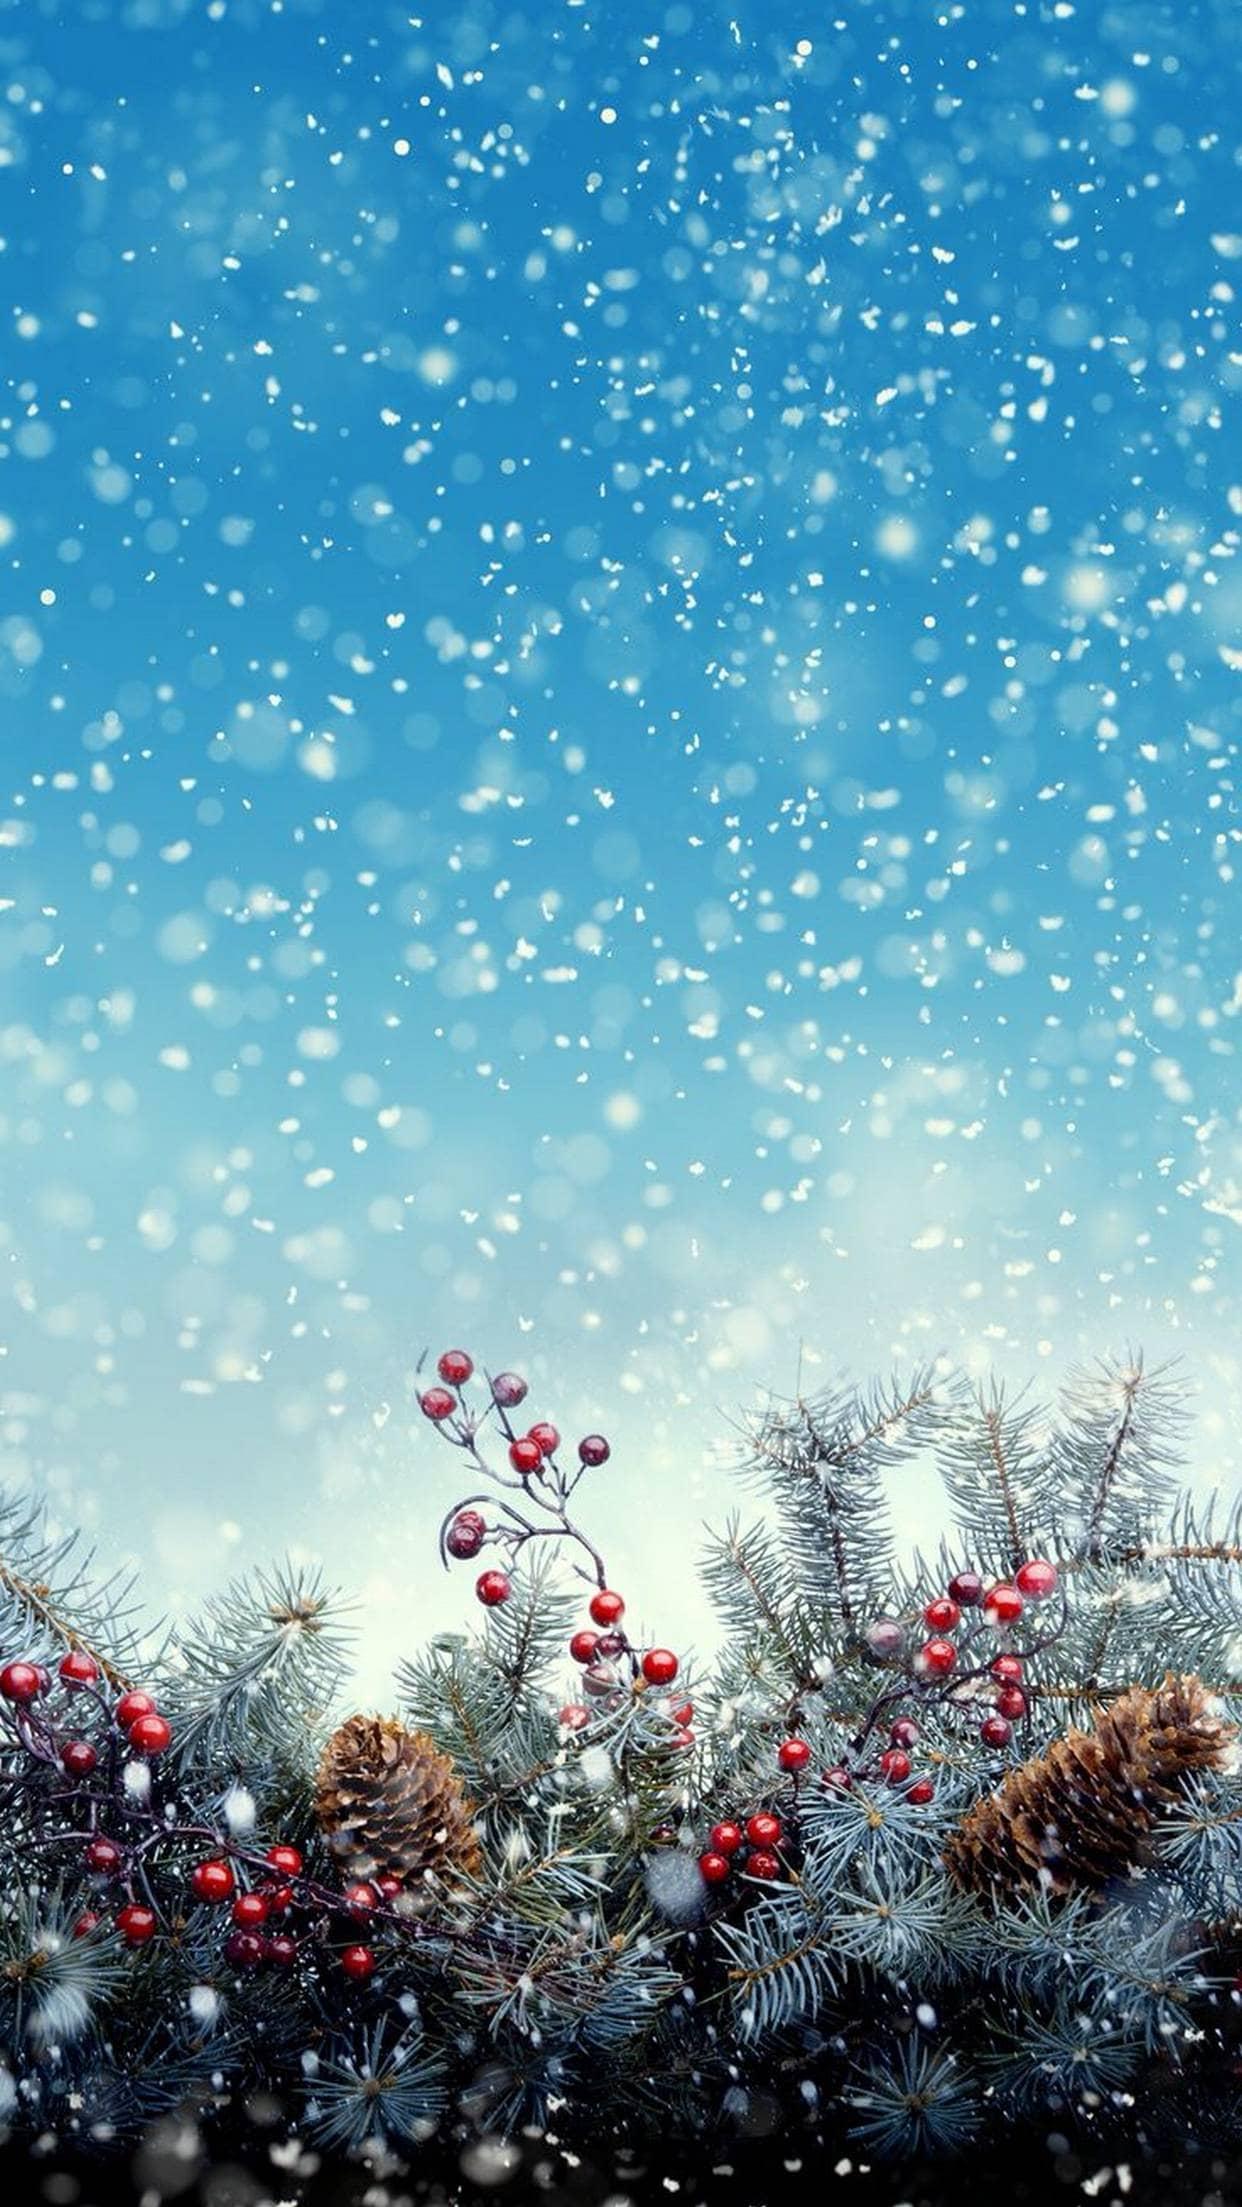 Try to Use Christmas Wallpapers for iPhones